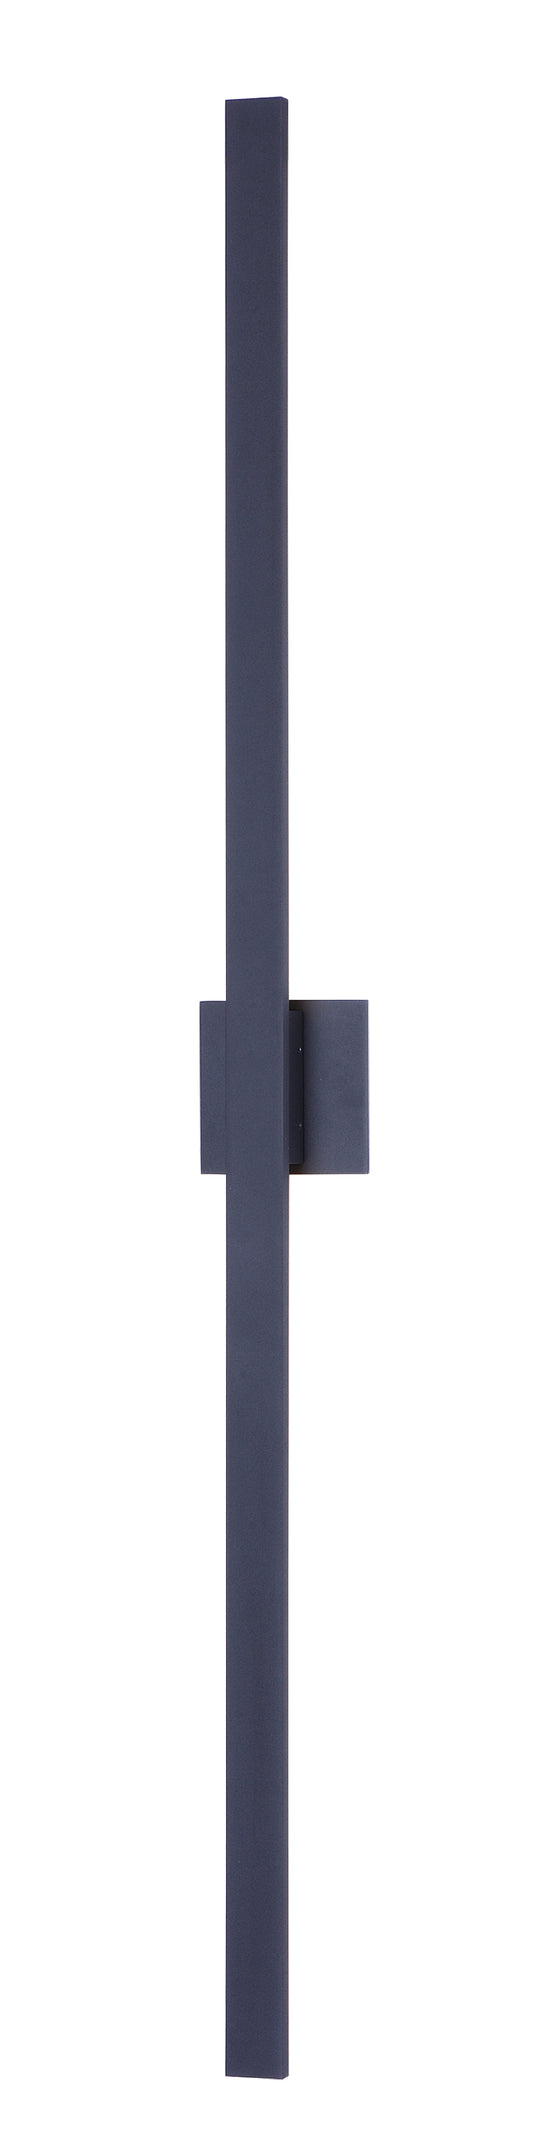 ET2 Alumilux: Line 51" LED Outdoor Wall Sconce